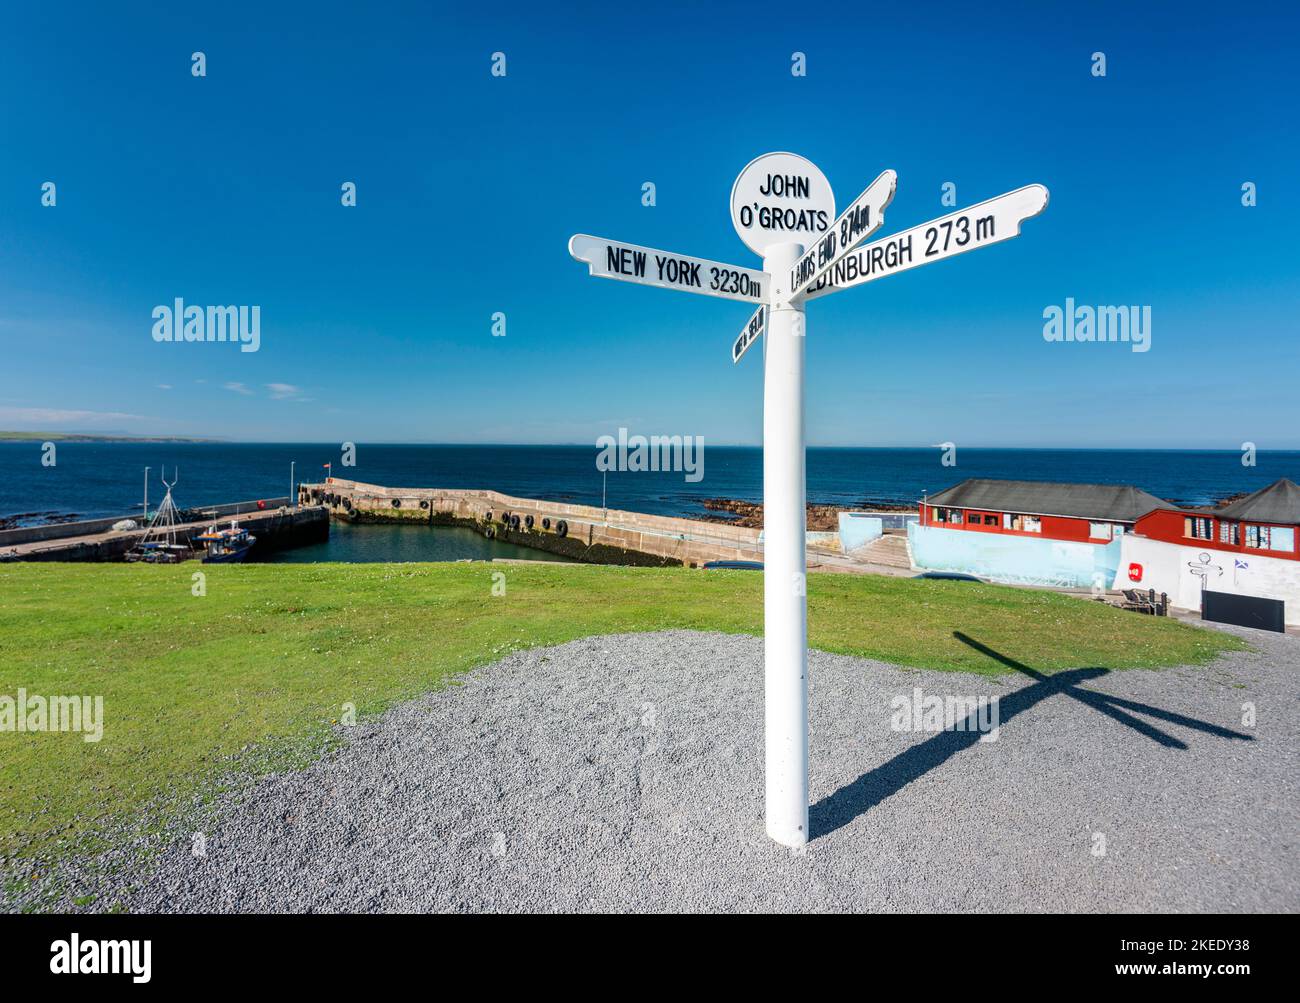 Famous multi-directional landmark and tourist destination,in hot sun,on north coast 500 route.Furthest northerly point of mainland Britain,famous for Stock Photo